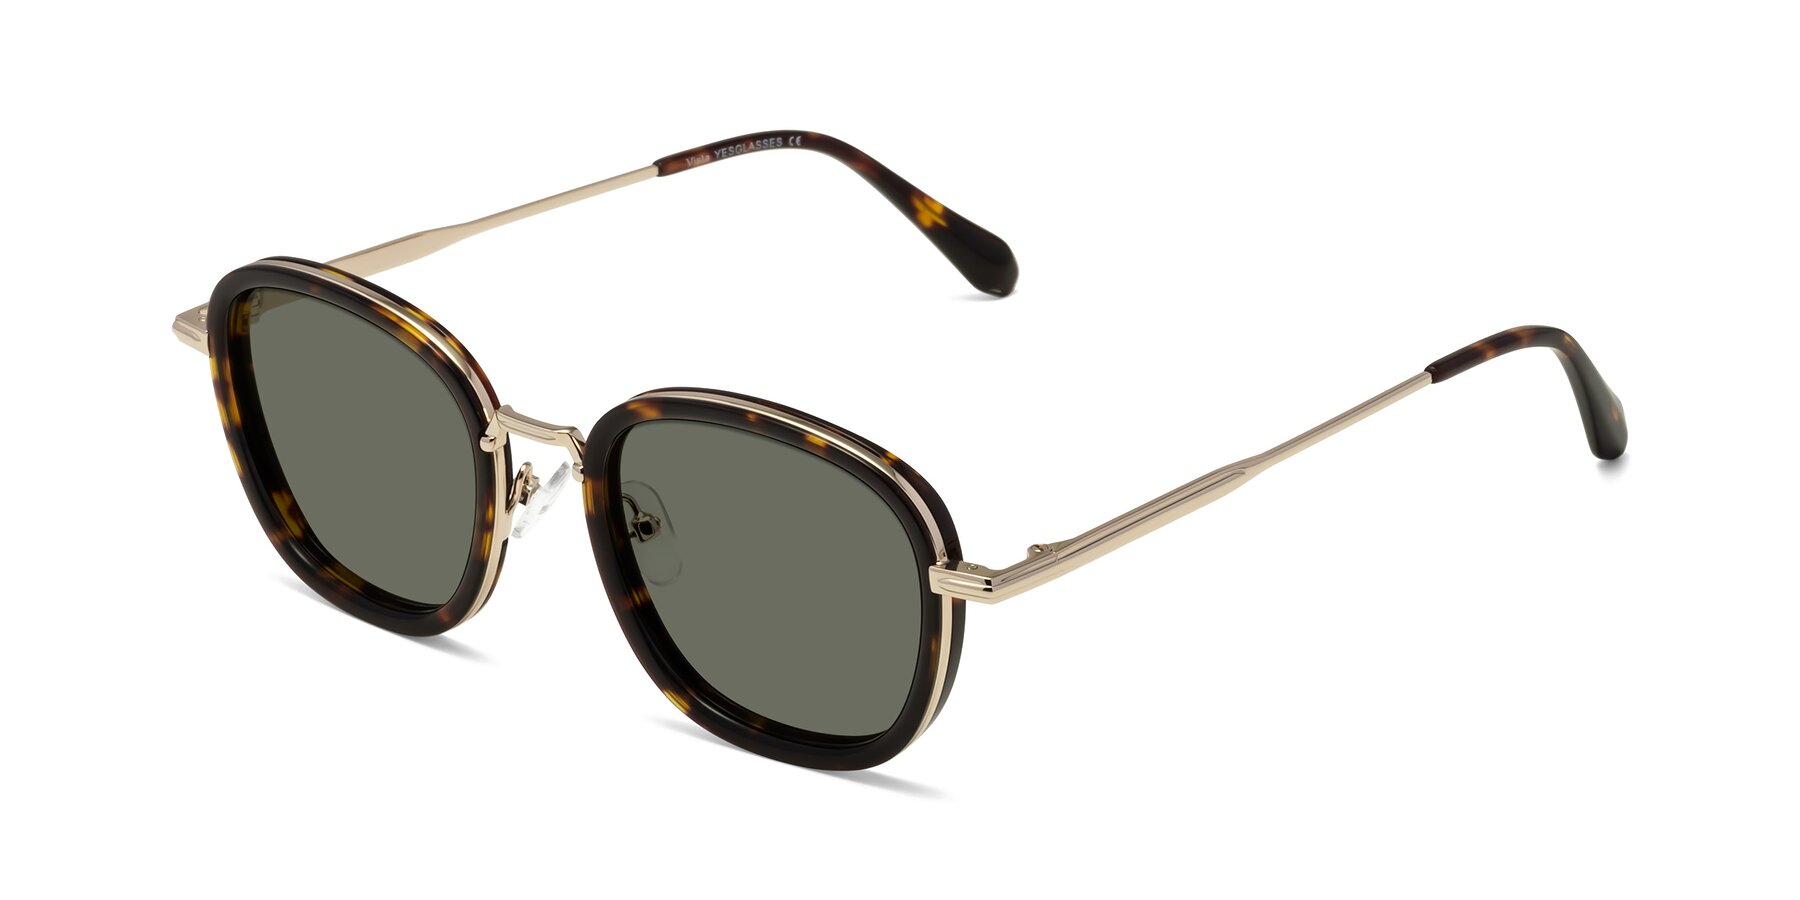 Angle of Vista in Tortoise-Light Gold with Gray Polarized Lenses